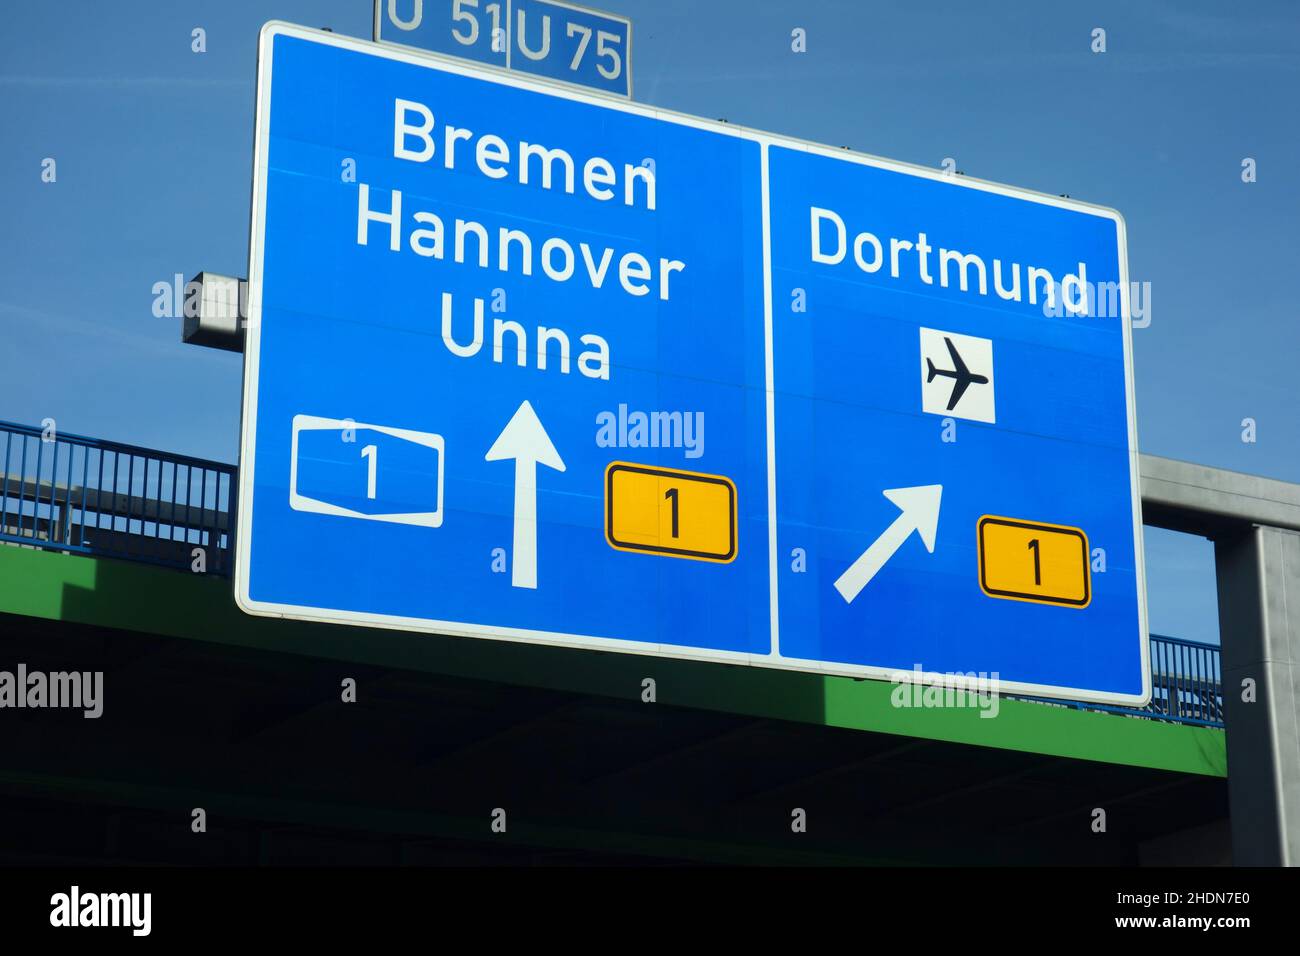 road sign, a1, b1, road signs Stock Photo